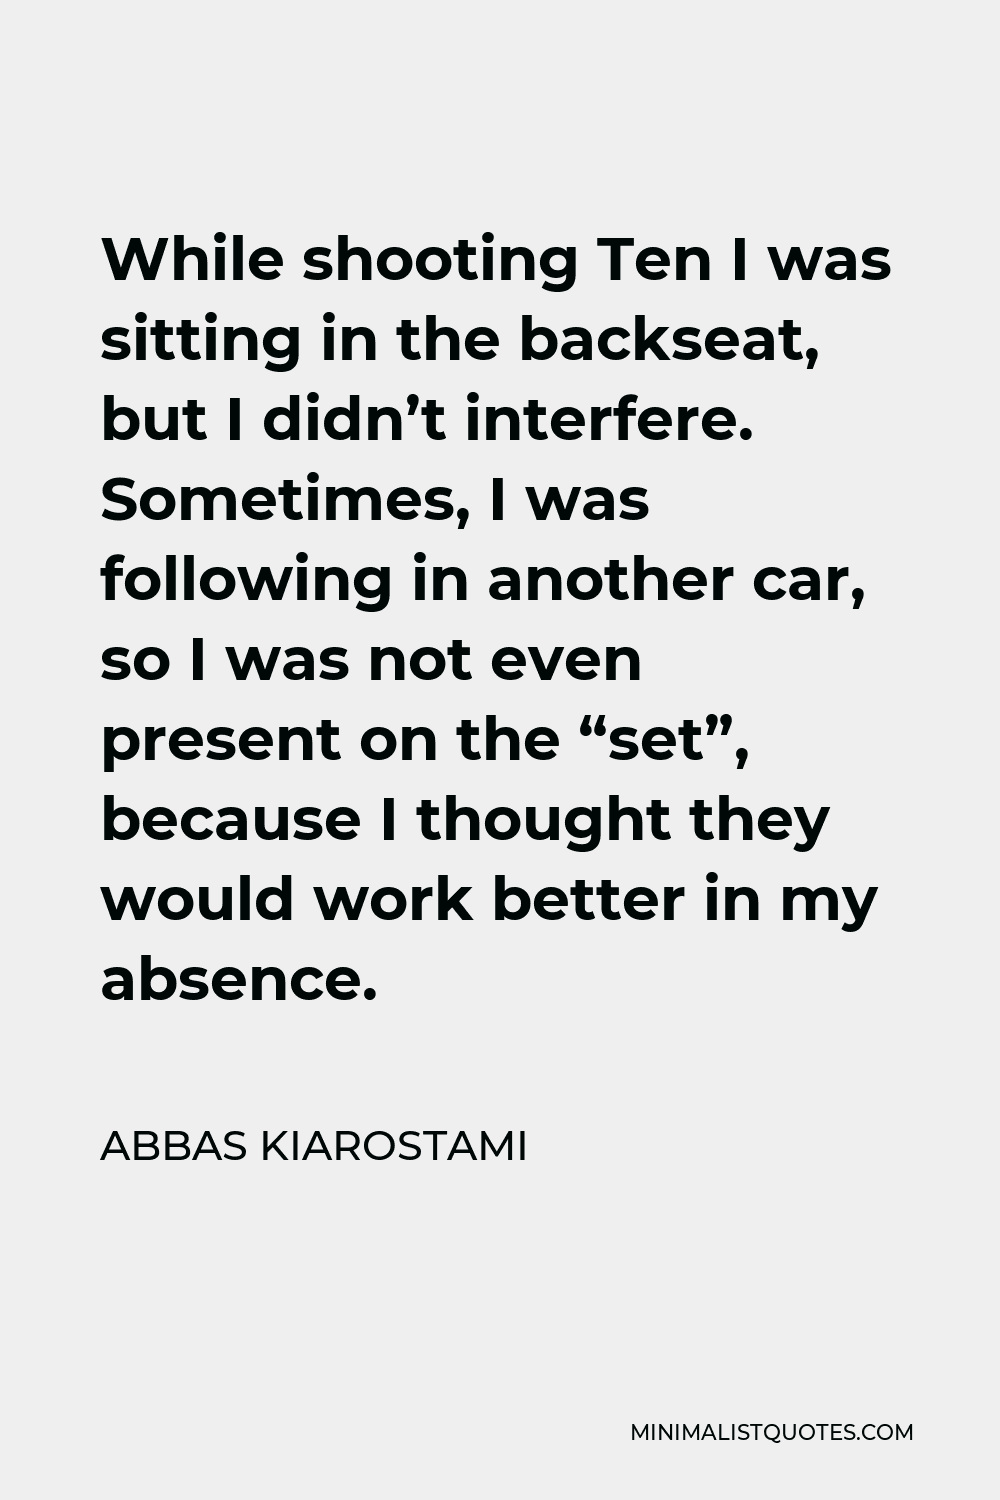 Abbas Kiarostami Quote - While shooting Ten I was sitting in the backseat, but I didn’t interfere. Sometimes, I was following in another car, so I was not even present on the “set”, because I thought they would work better in my absence.